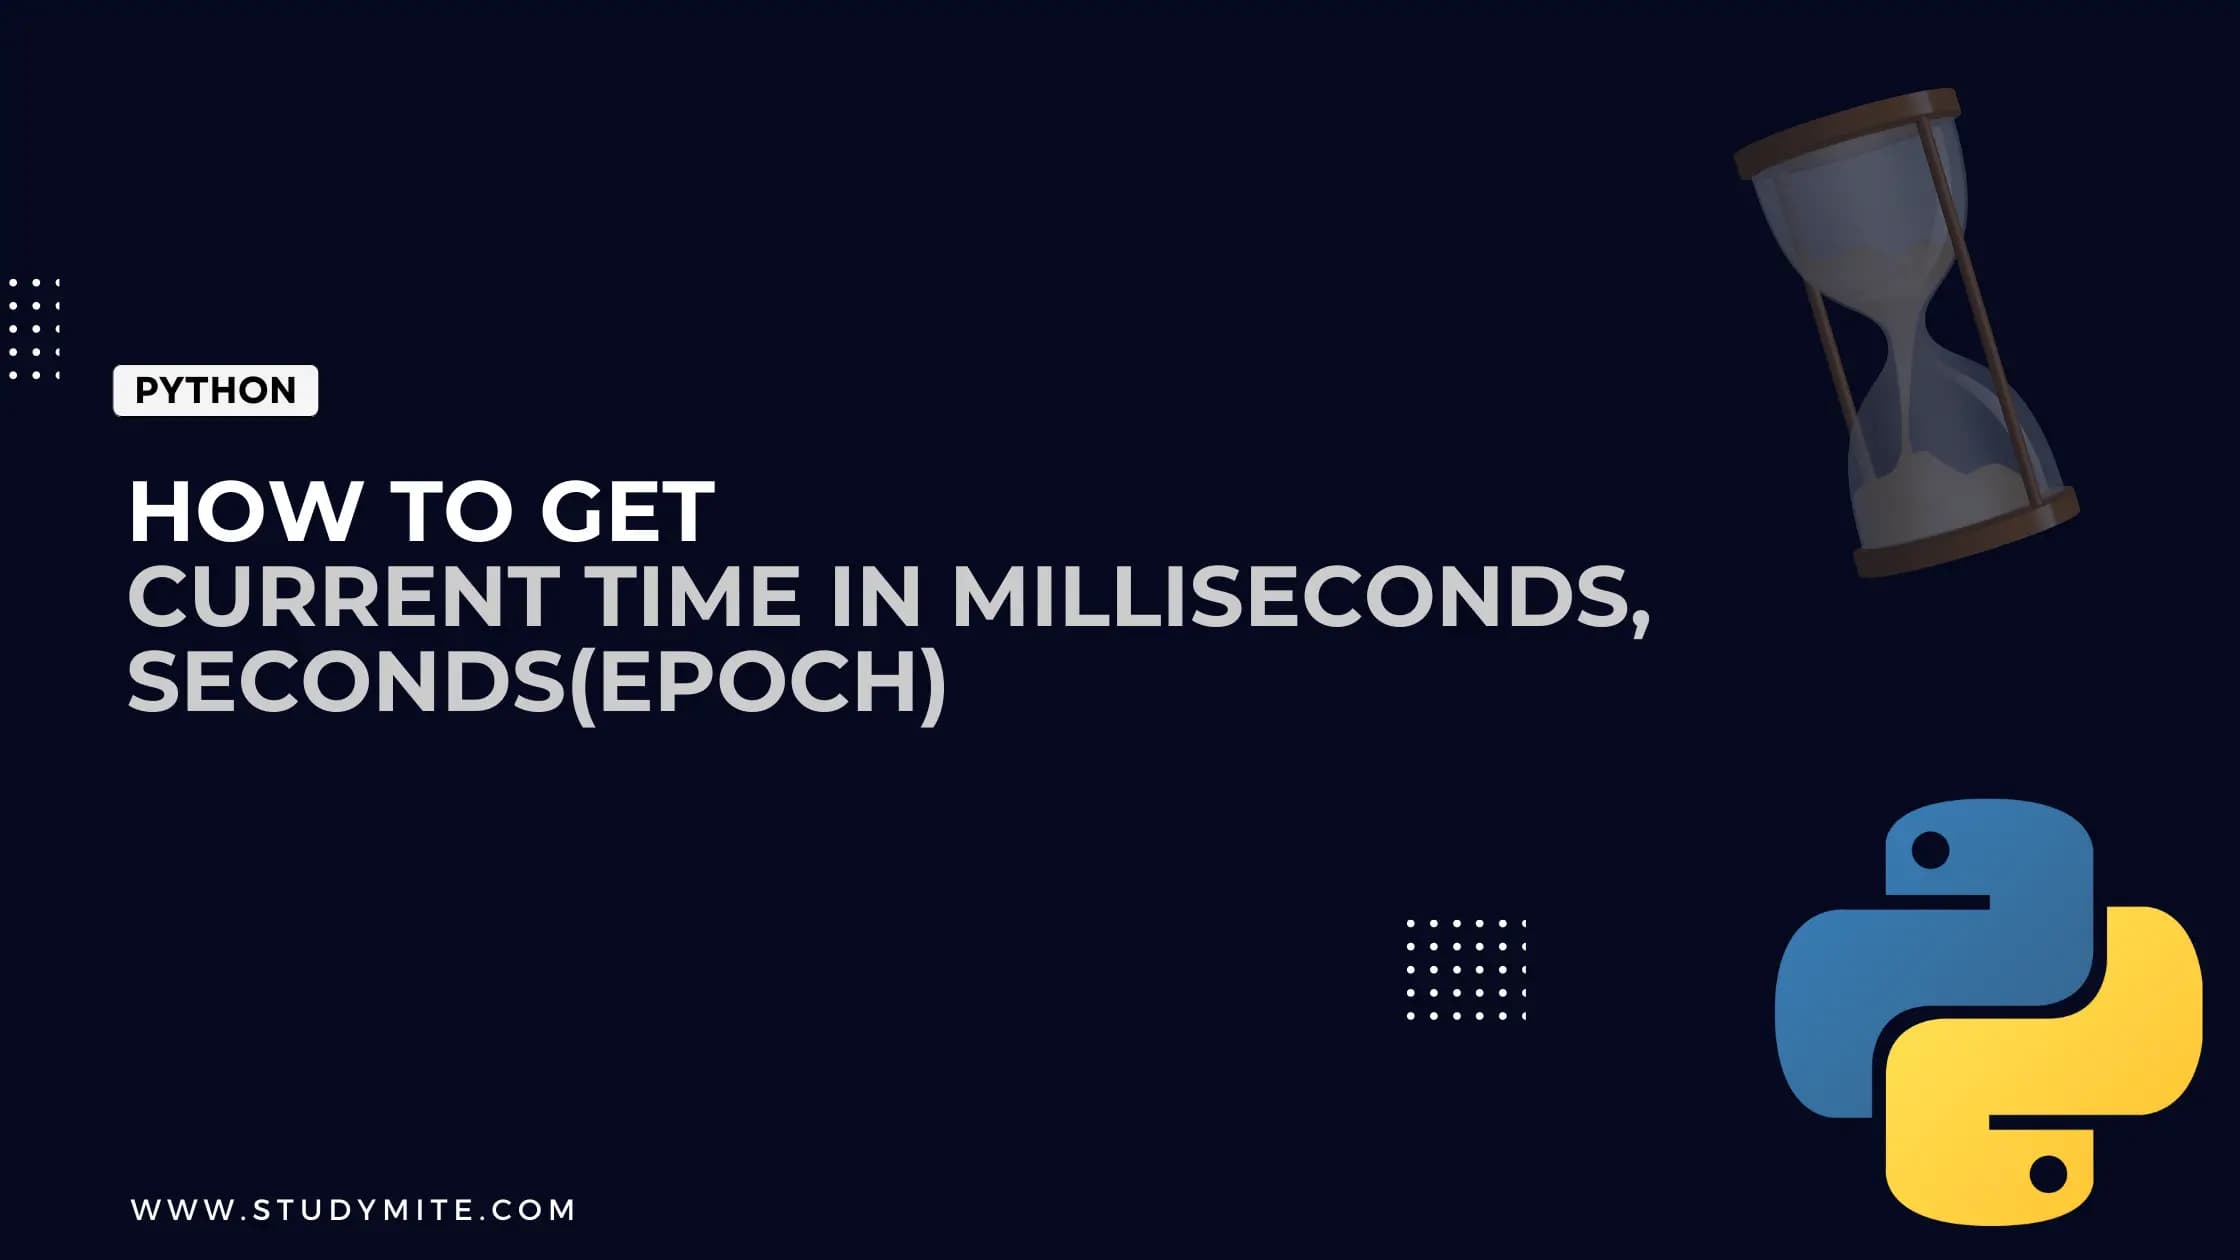 How to Get Current Time in Milliseconds, Seconds(epoch) Using Various Methods in Python